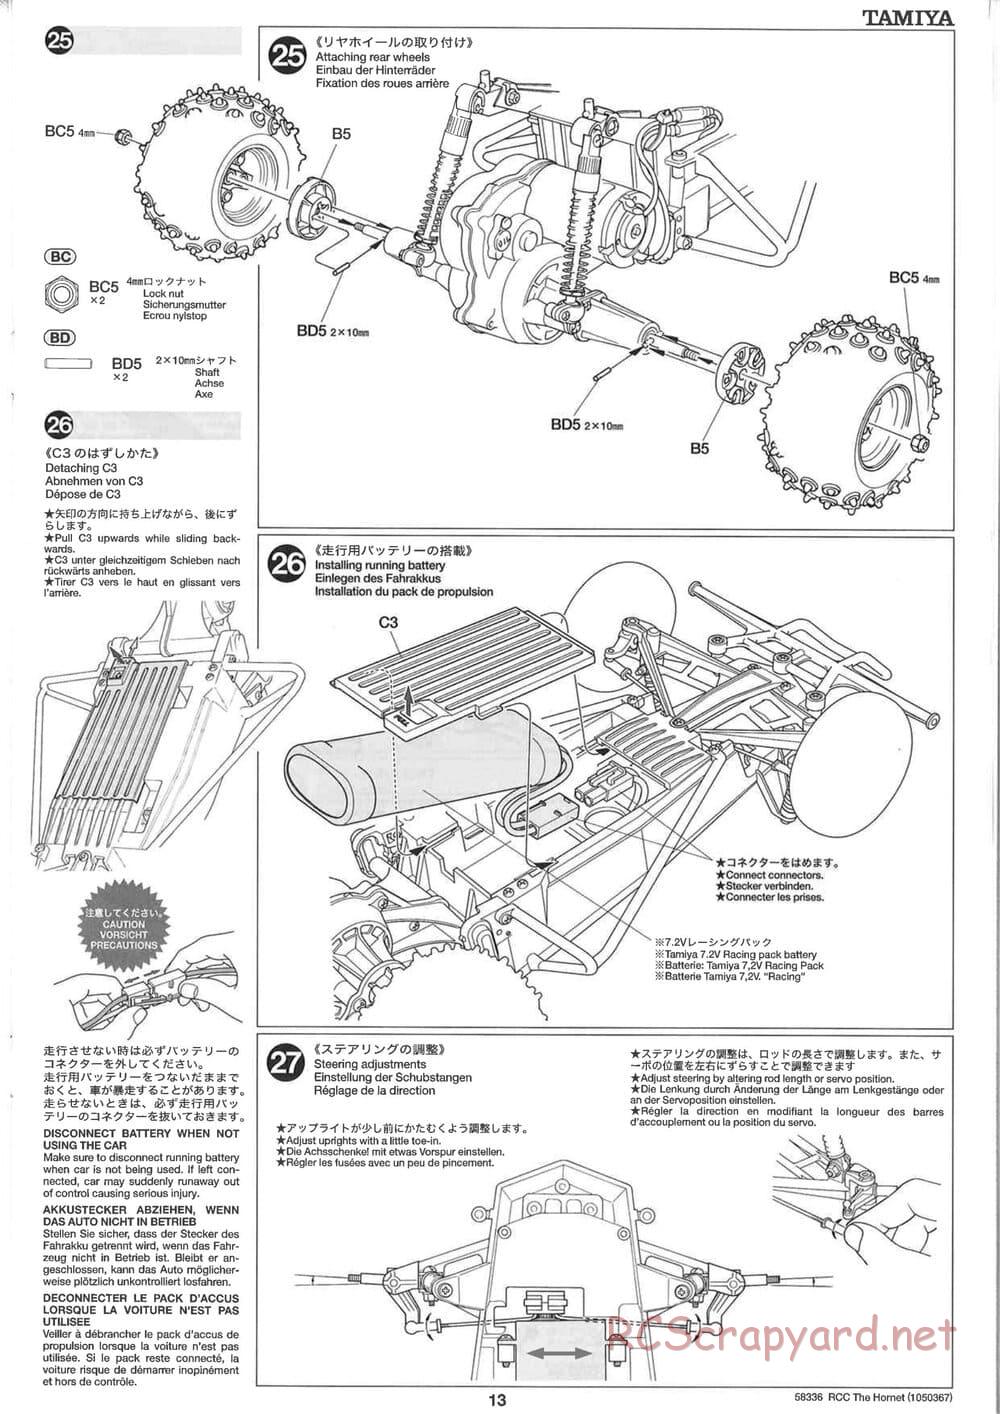 Tamiya - The Hornet (2004) - GH Chassis - Manual - Page 13